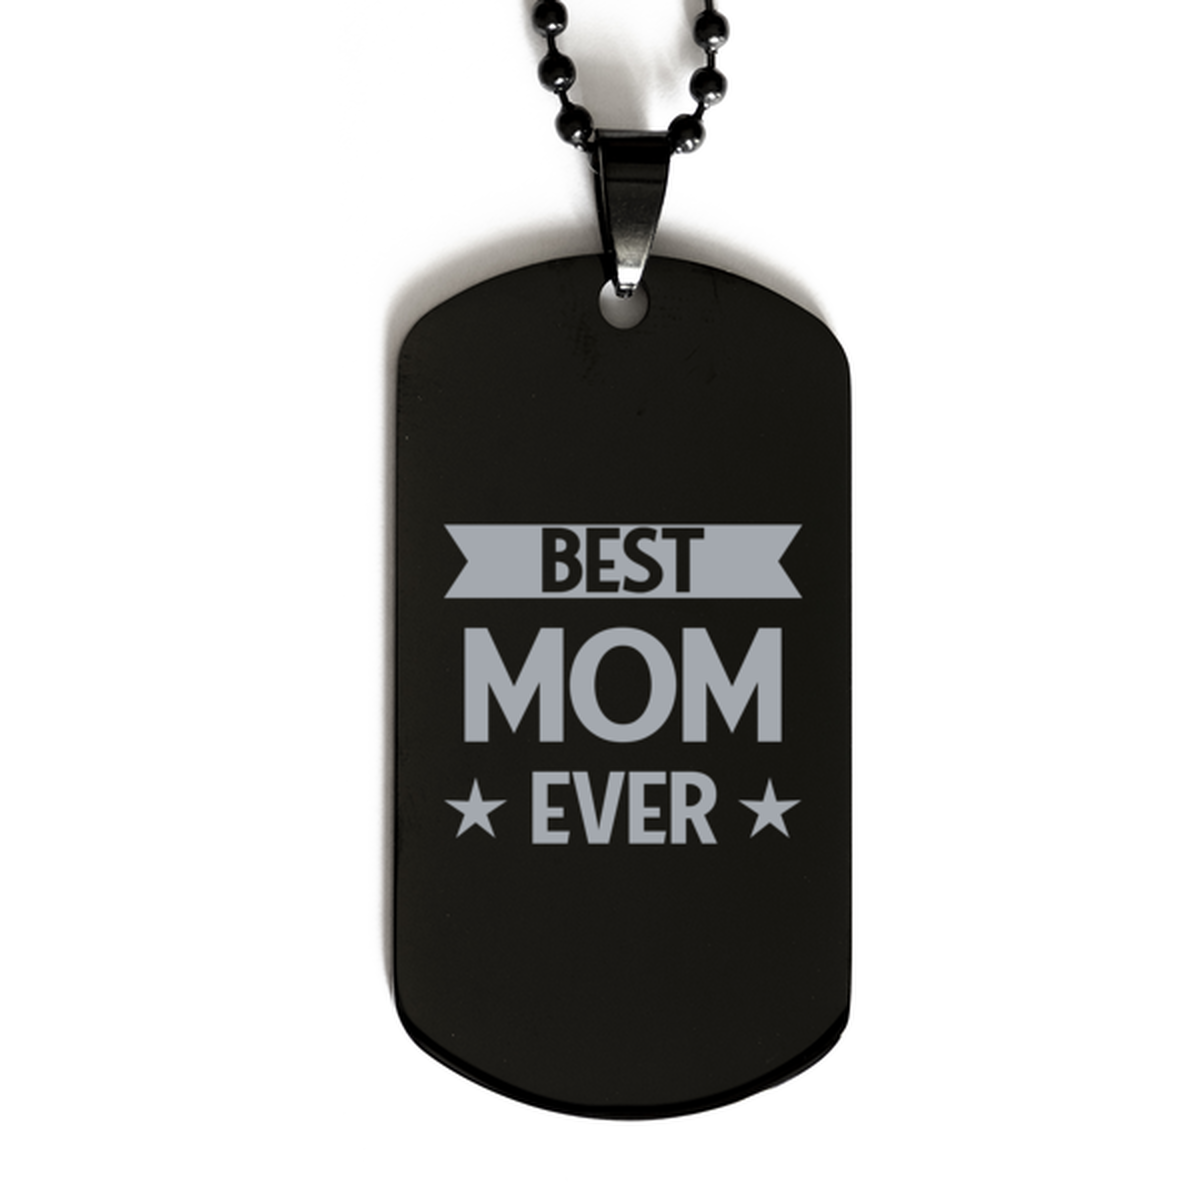 Best Mom Ever Mom Gifts, Funny Black Dog Tag For Mom, Birthday Family Presents Engraved Necklace For Women